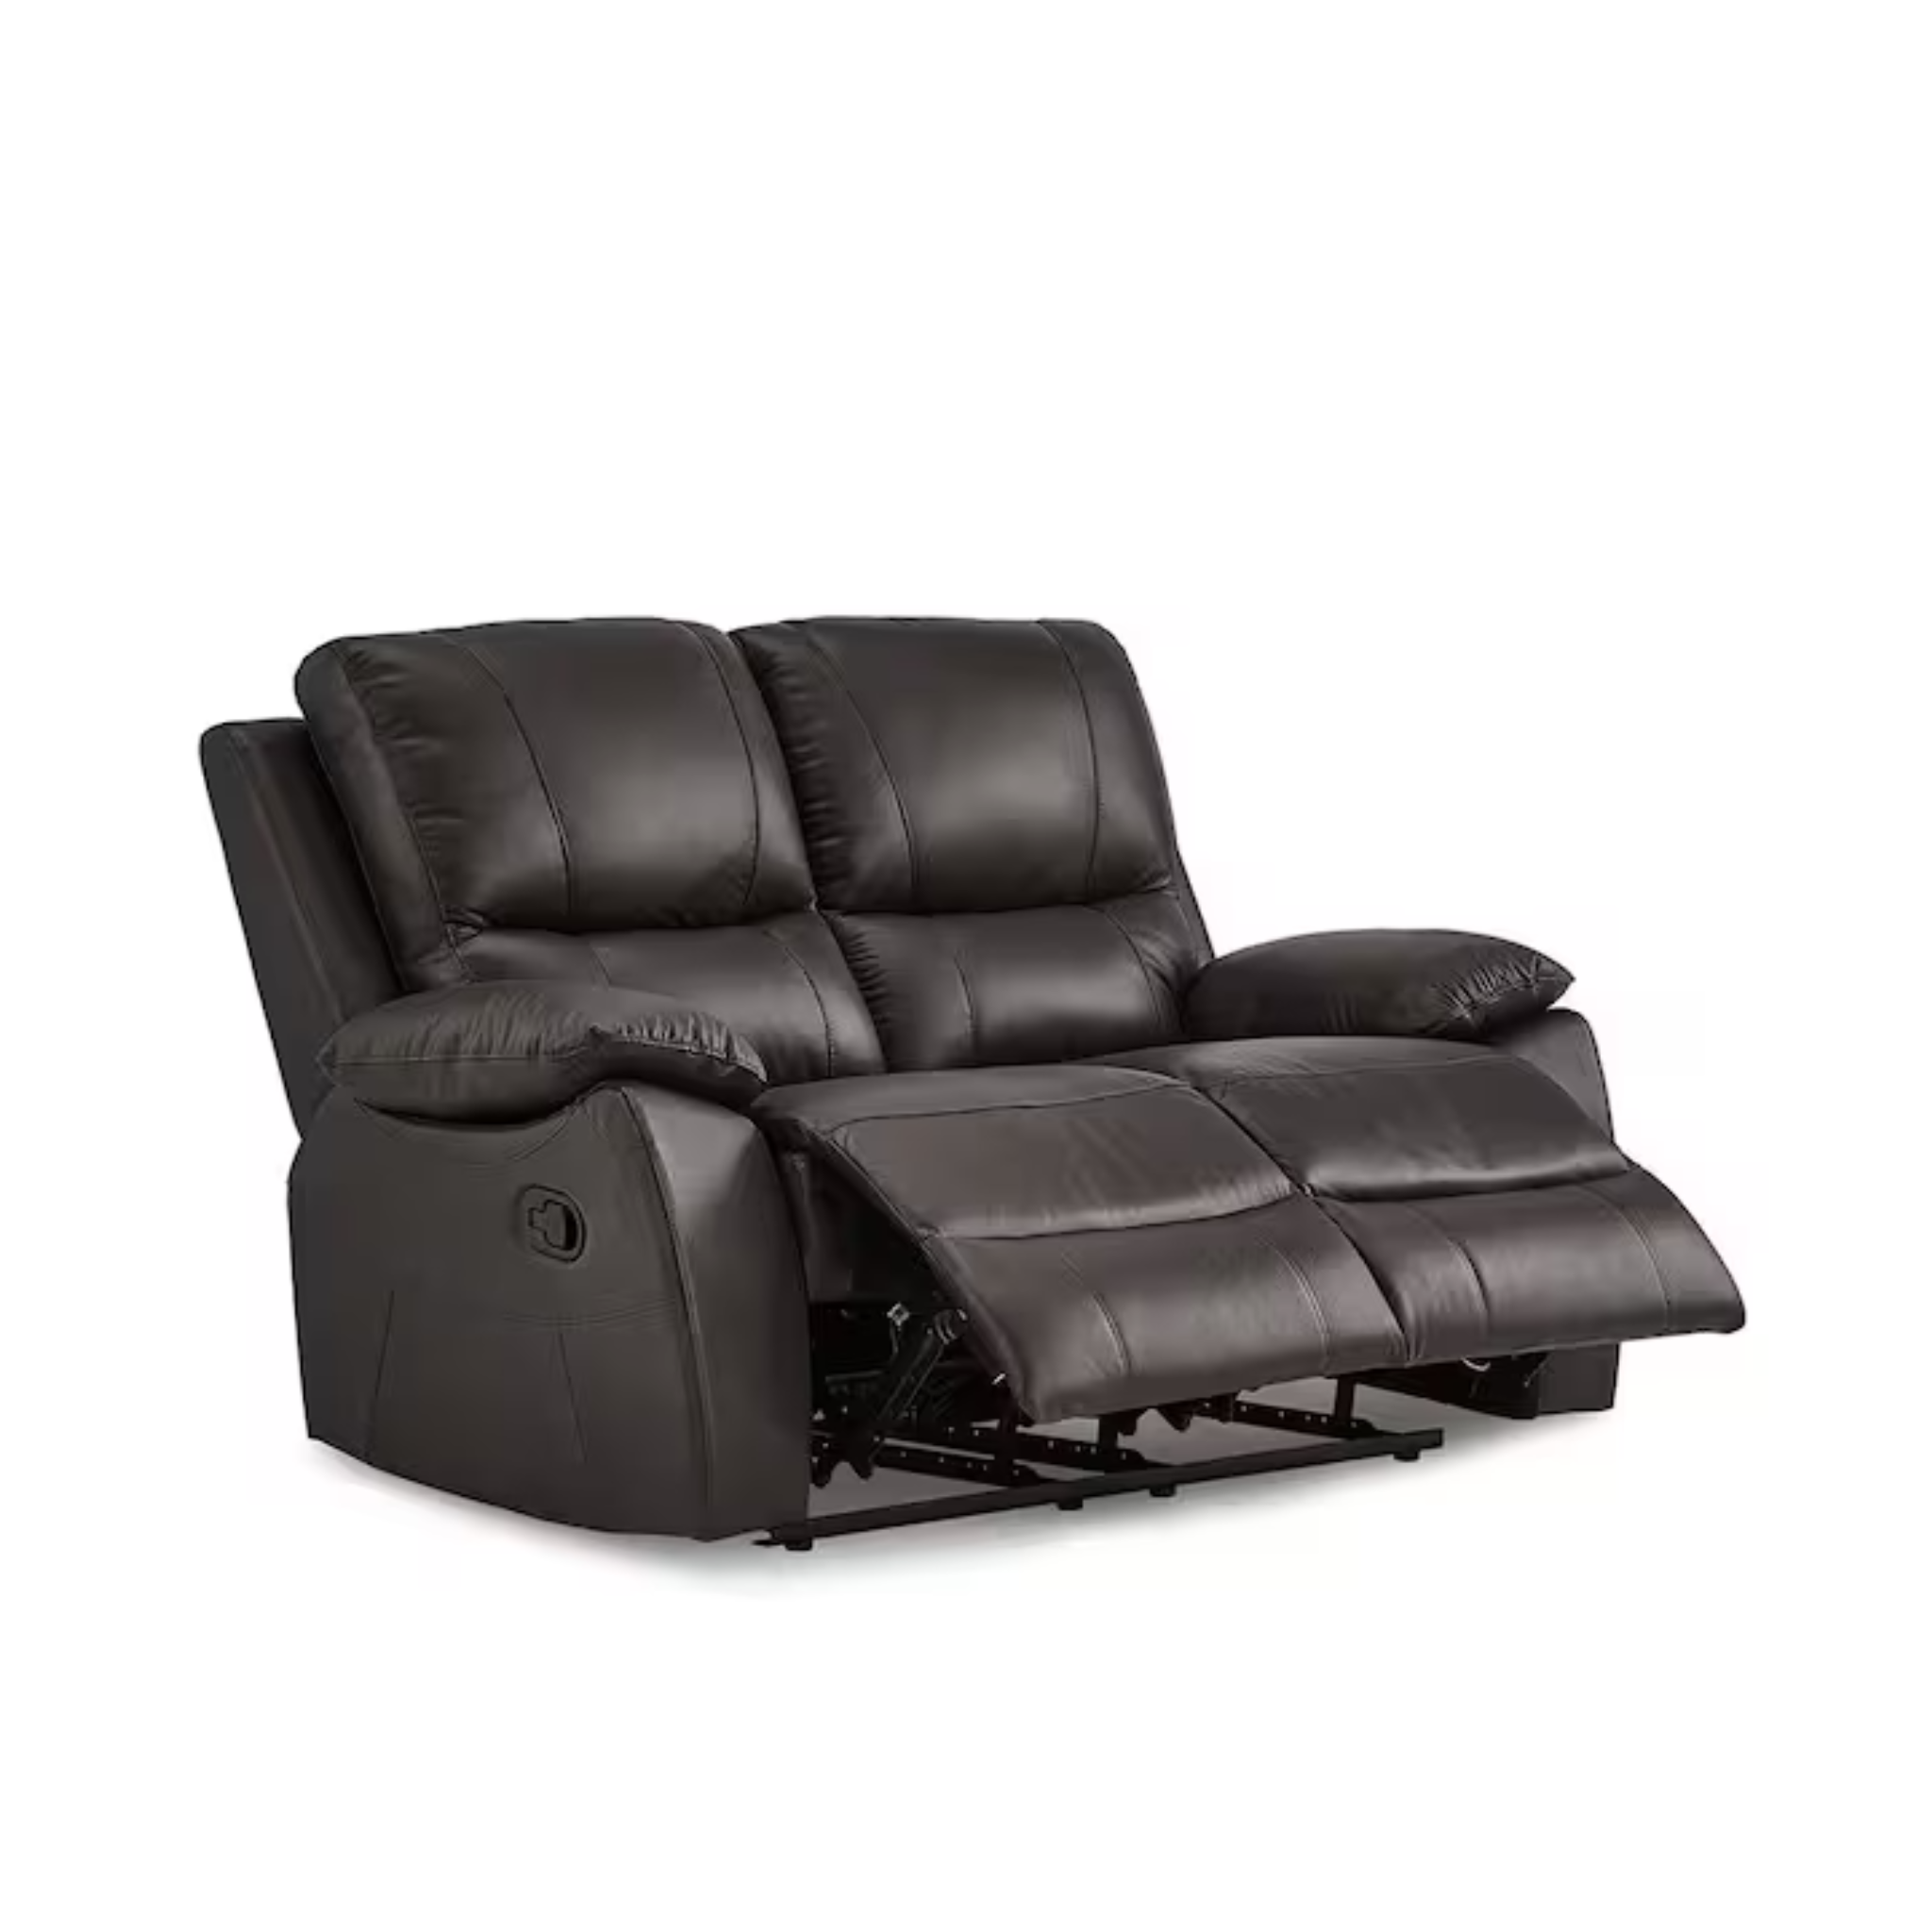 Faux Leather Double Manual Reclining Loveseat